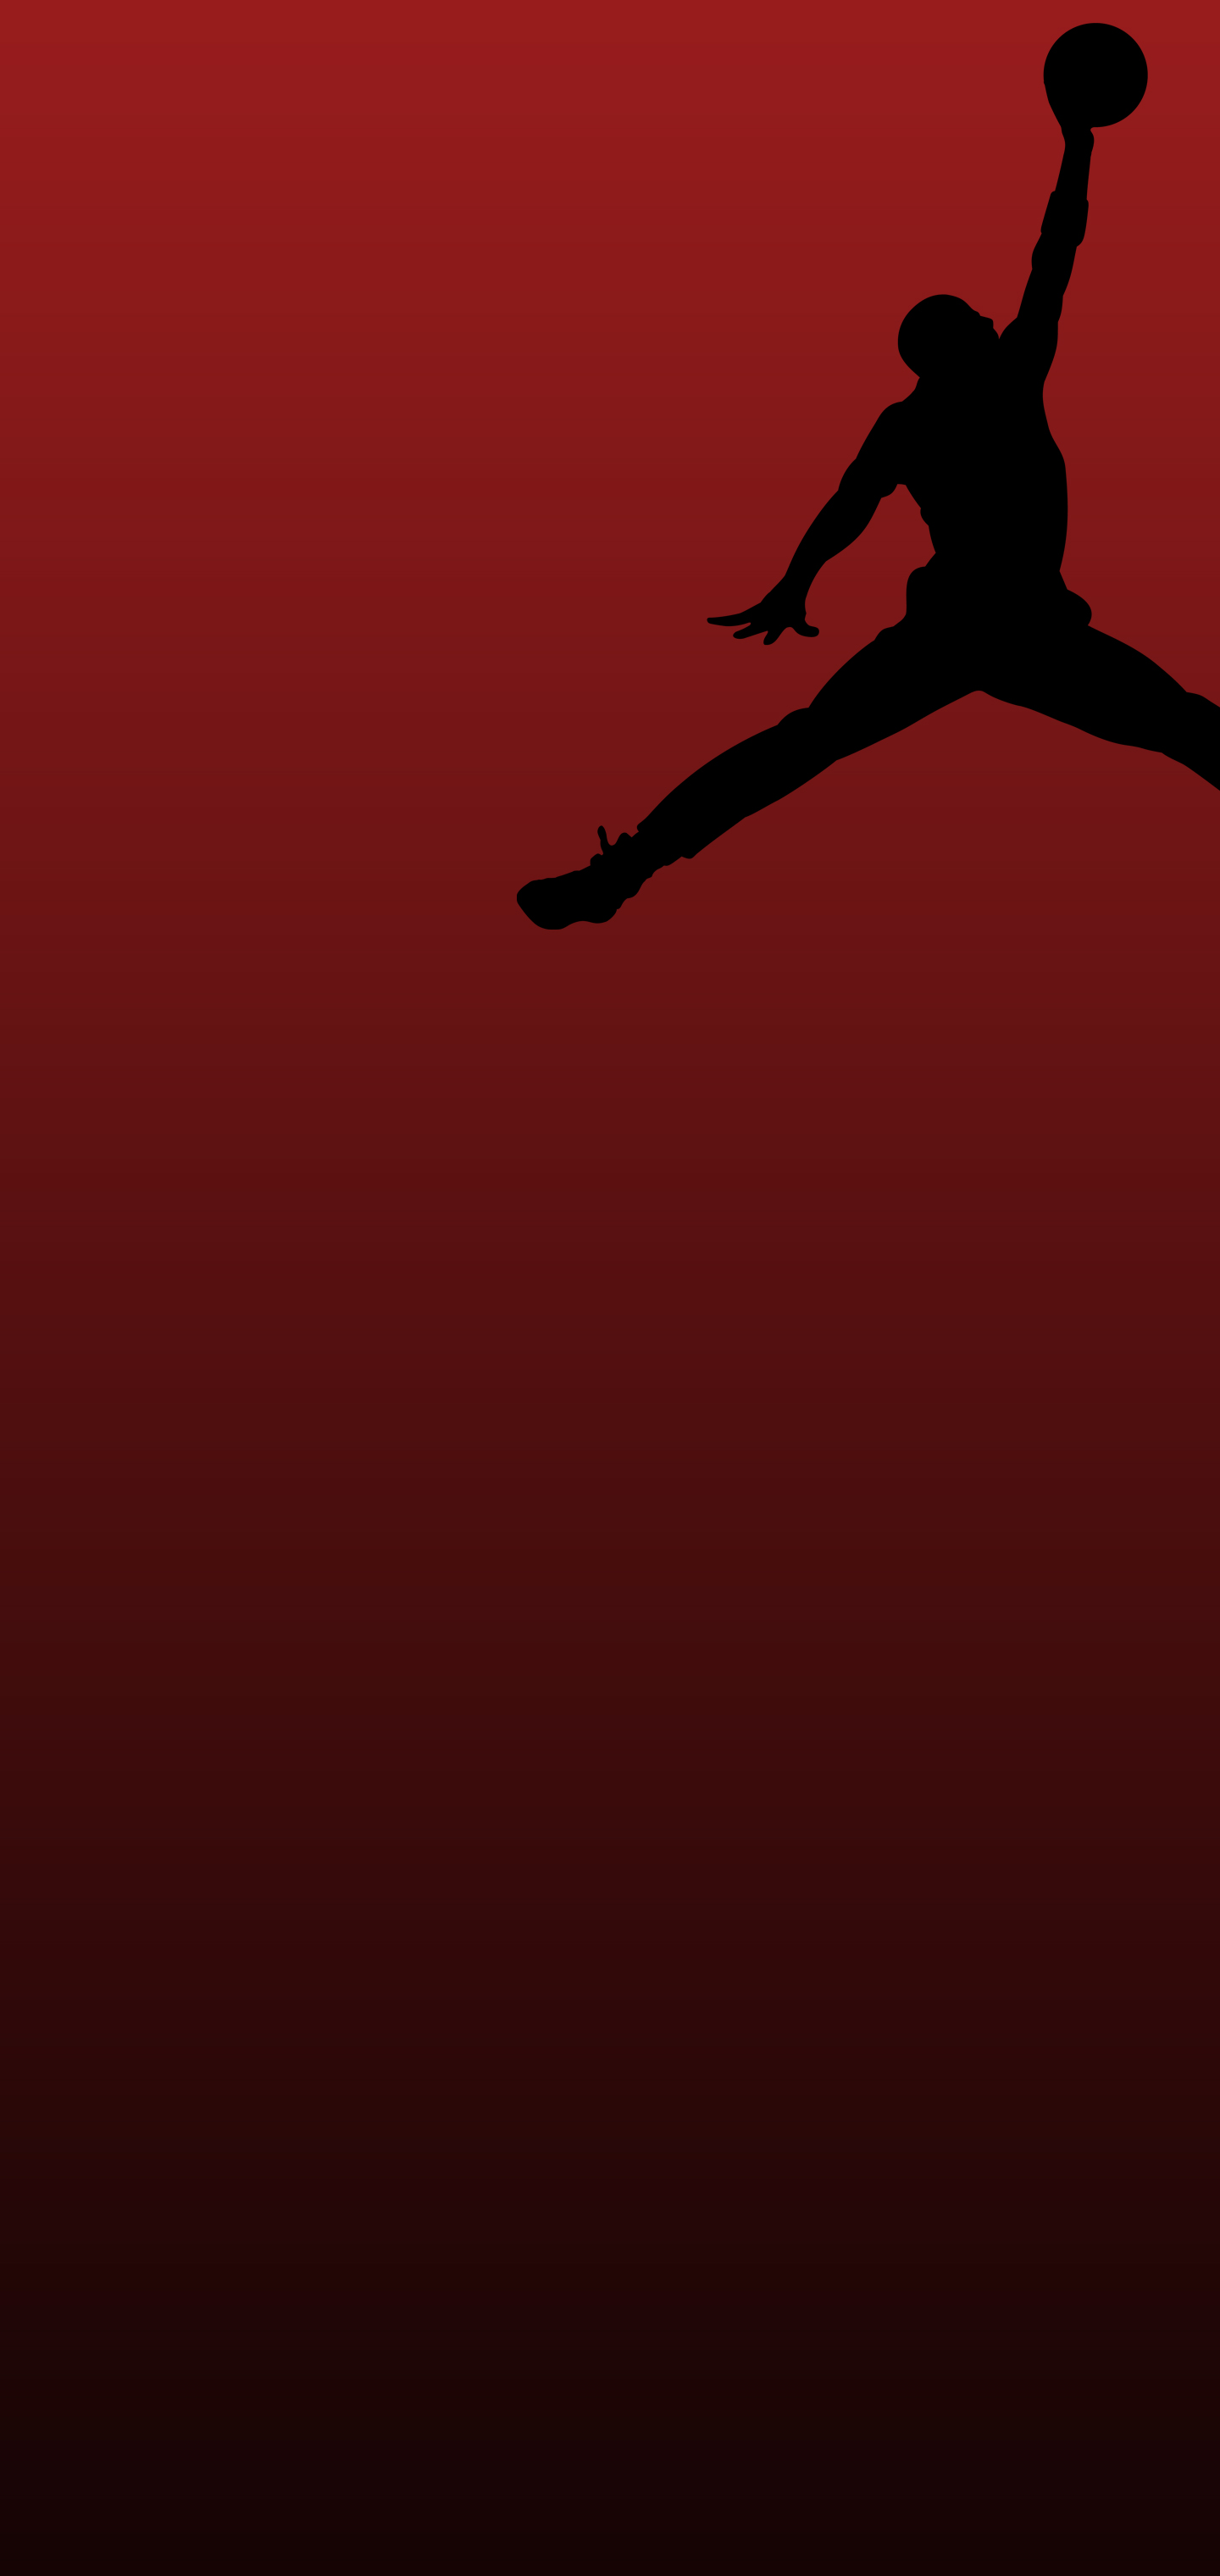 Air Jordan in Red Galaxy S10 Hole Punch Wallpaper